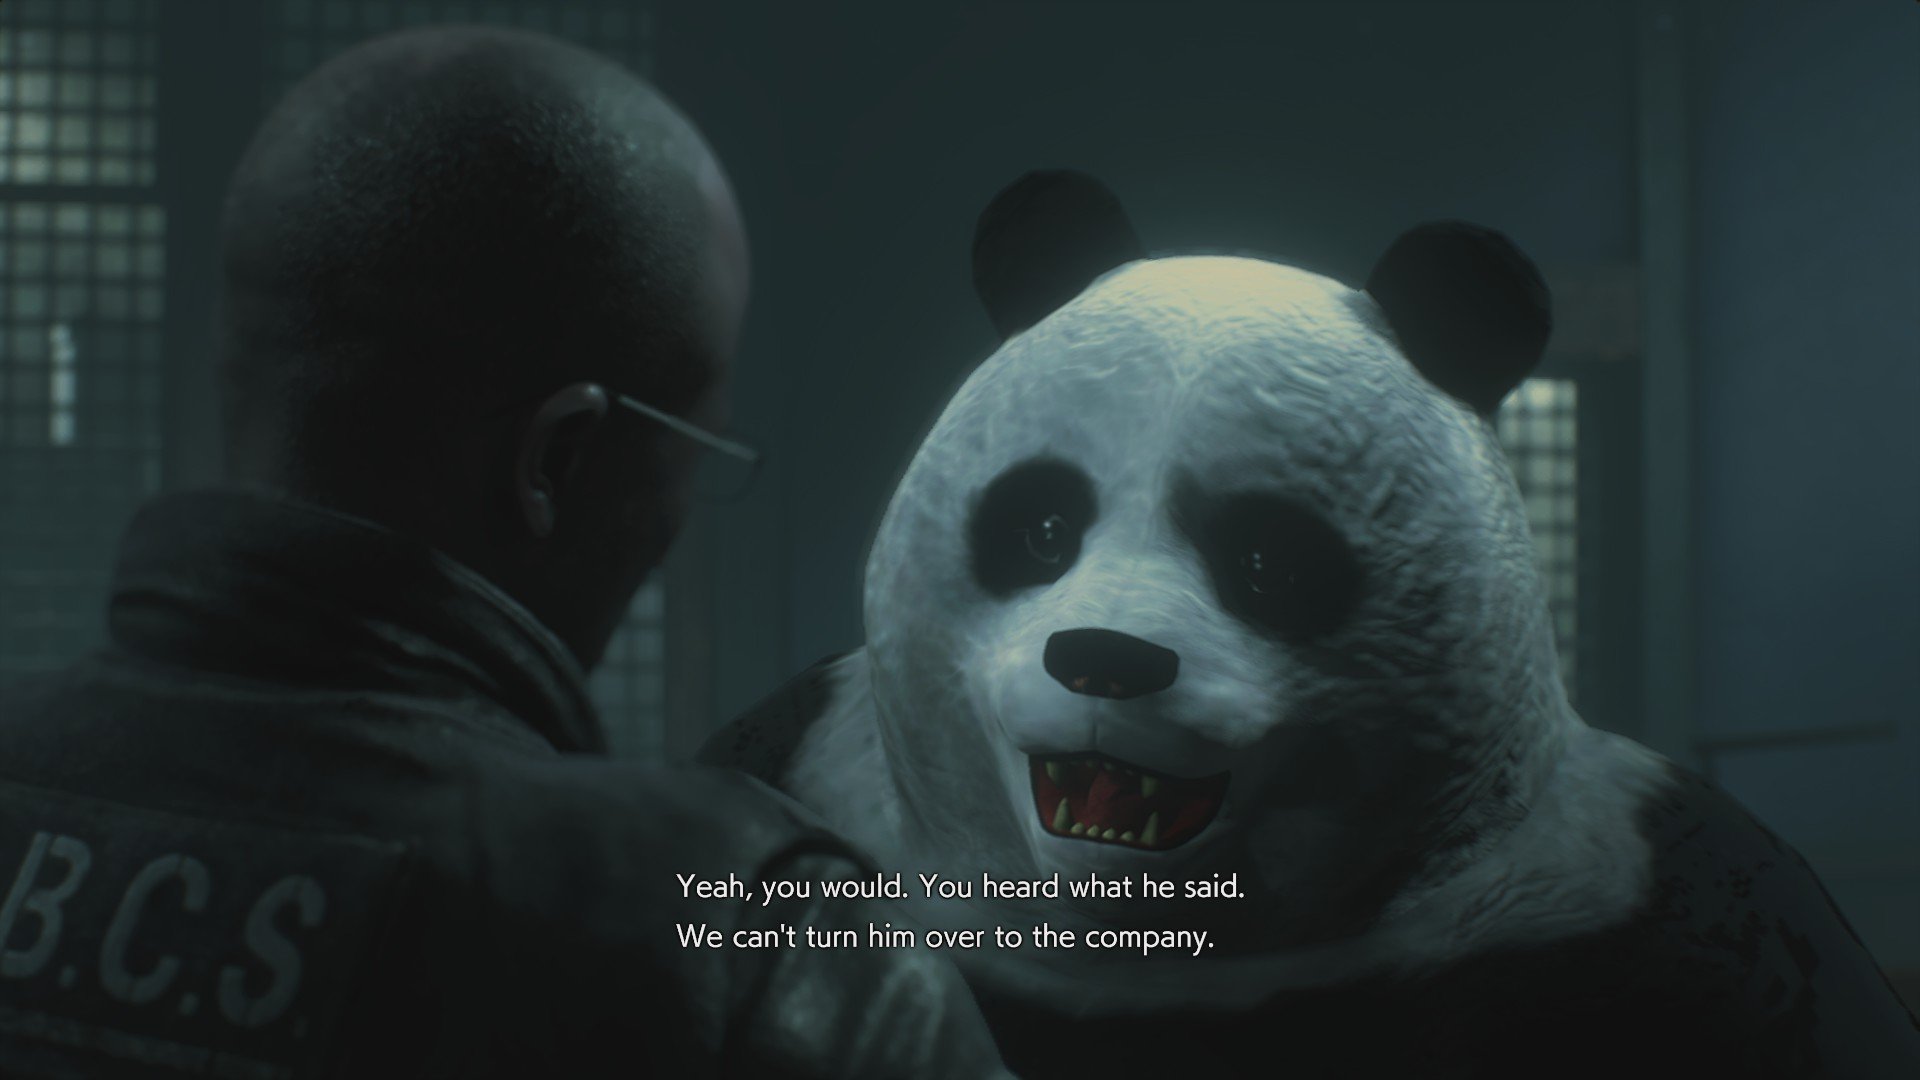 Gaming memes - giant panda - B.C.S. Yeah, you would. You heard what he said. We can't turn him over to the company.